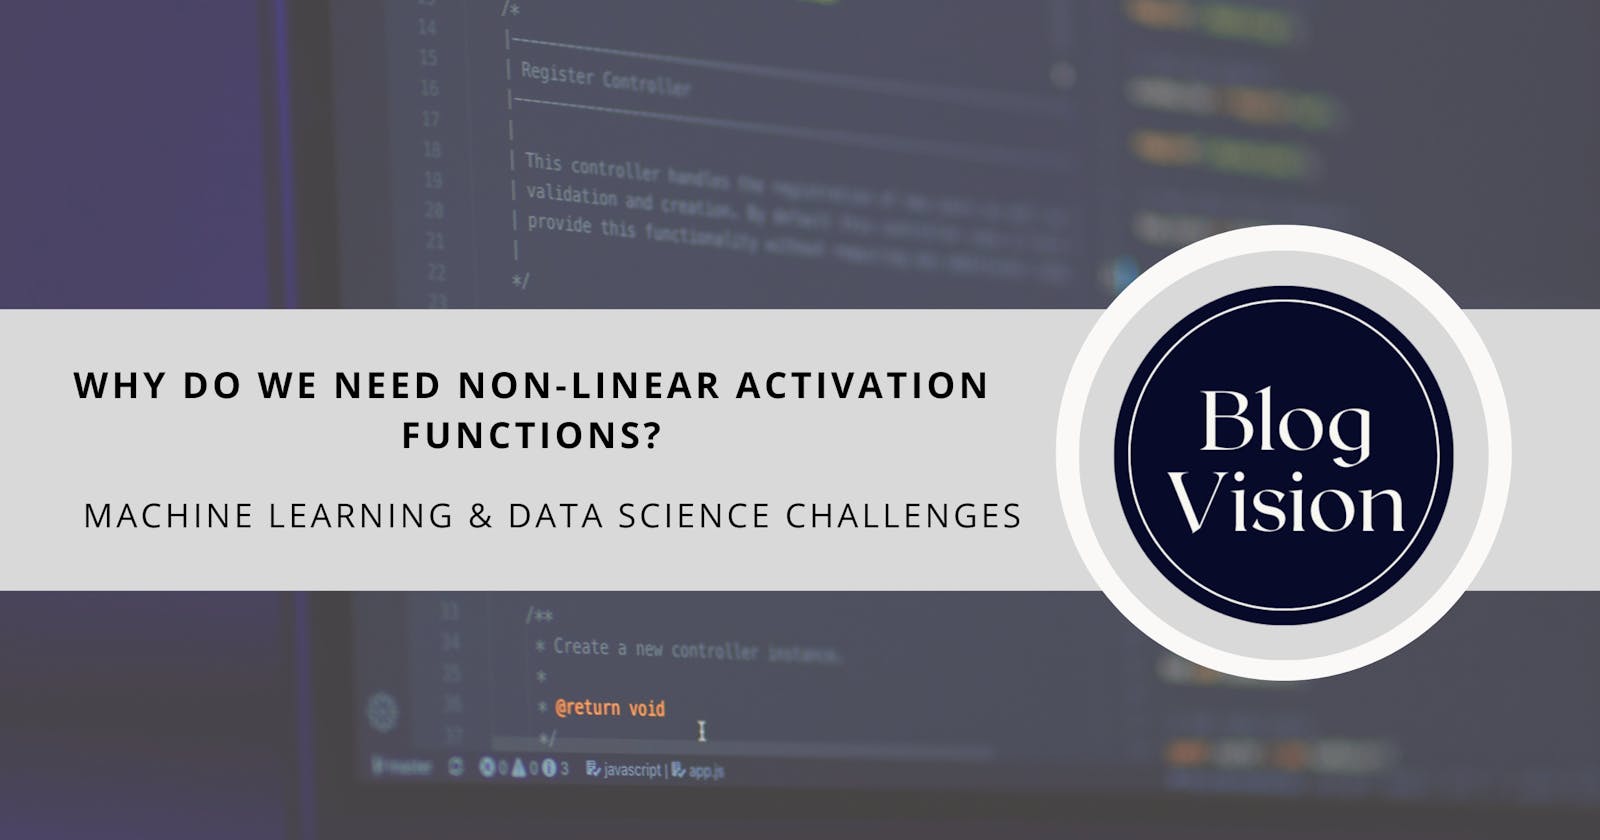 #73 Machine Learning & Data Science Challenge 73